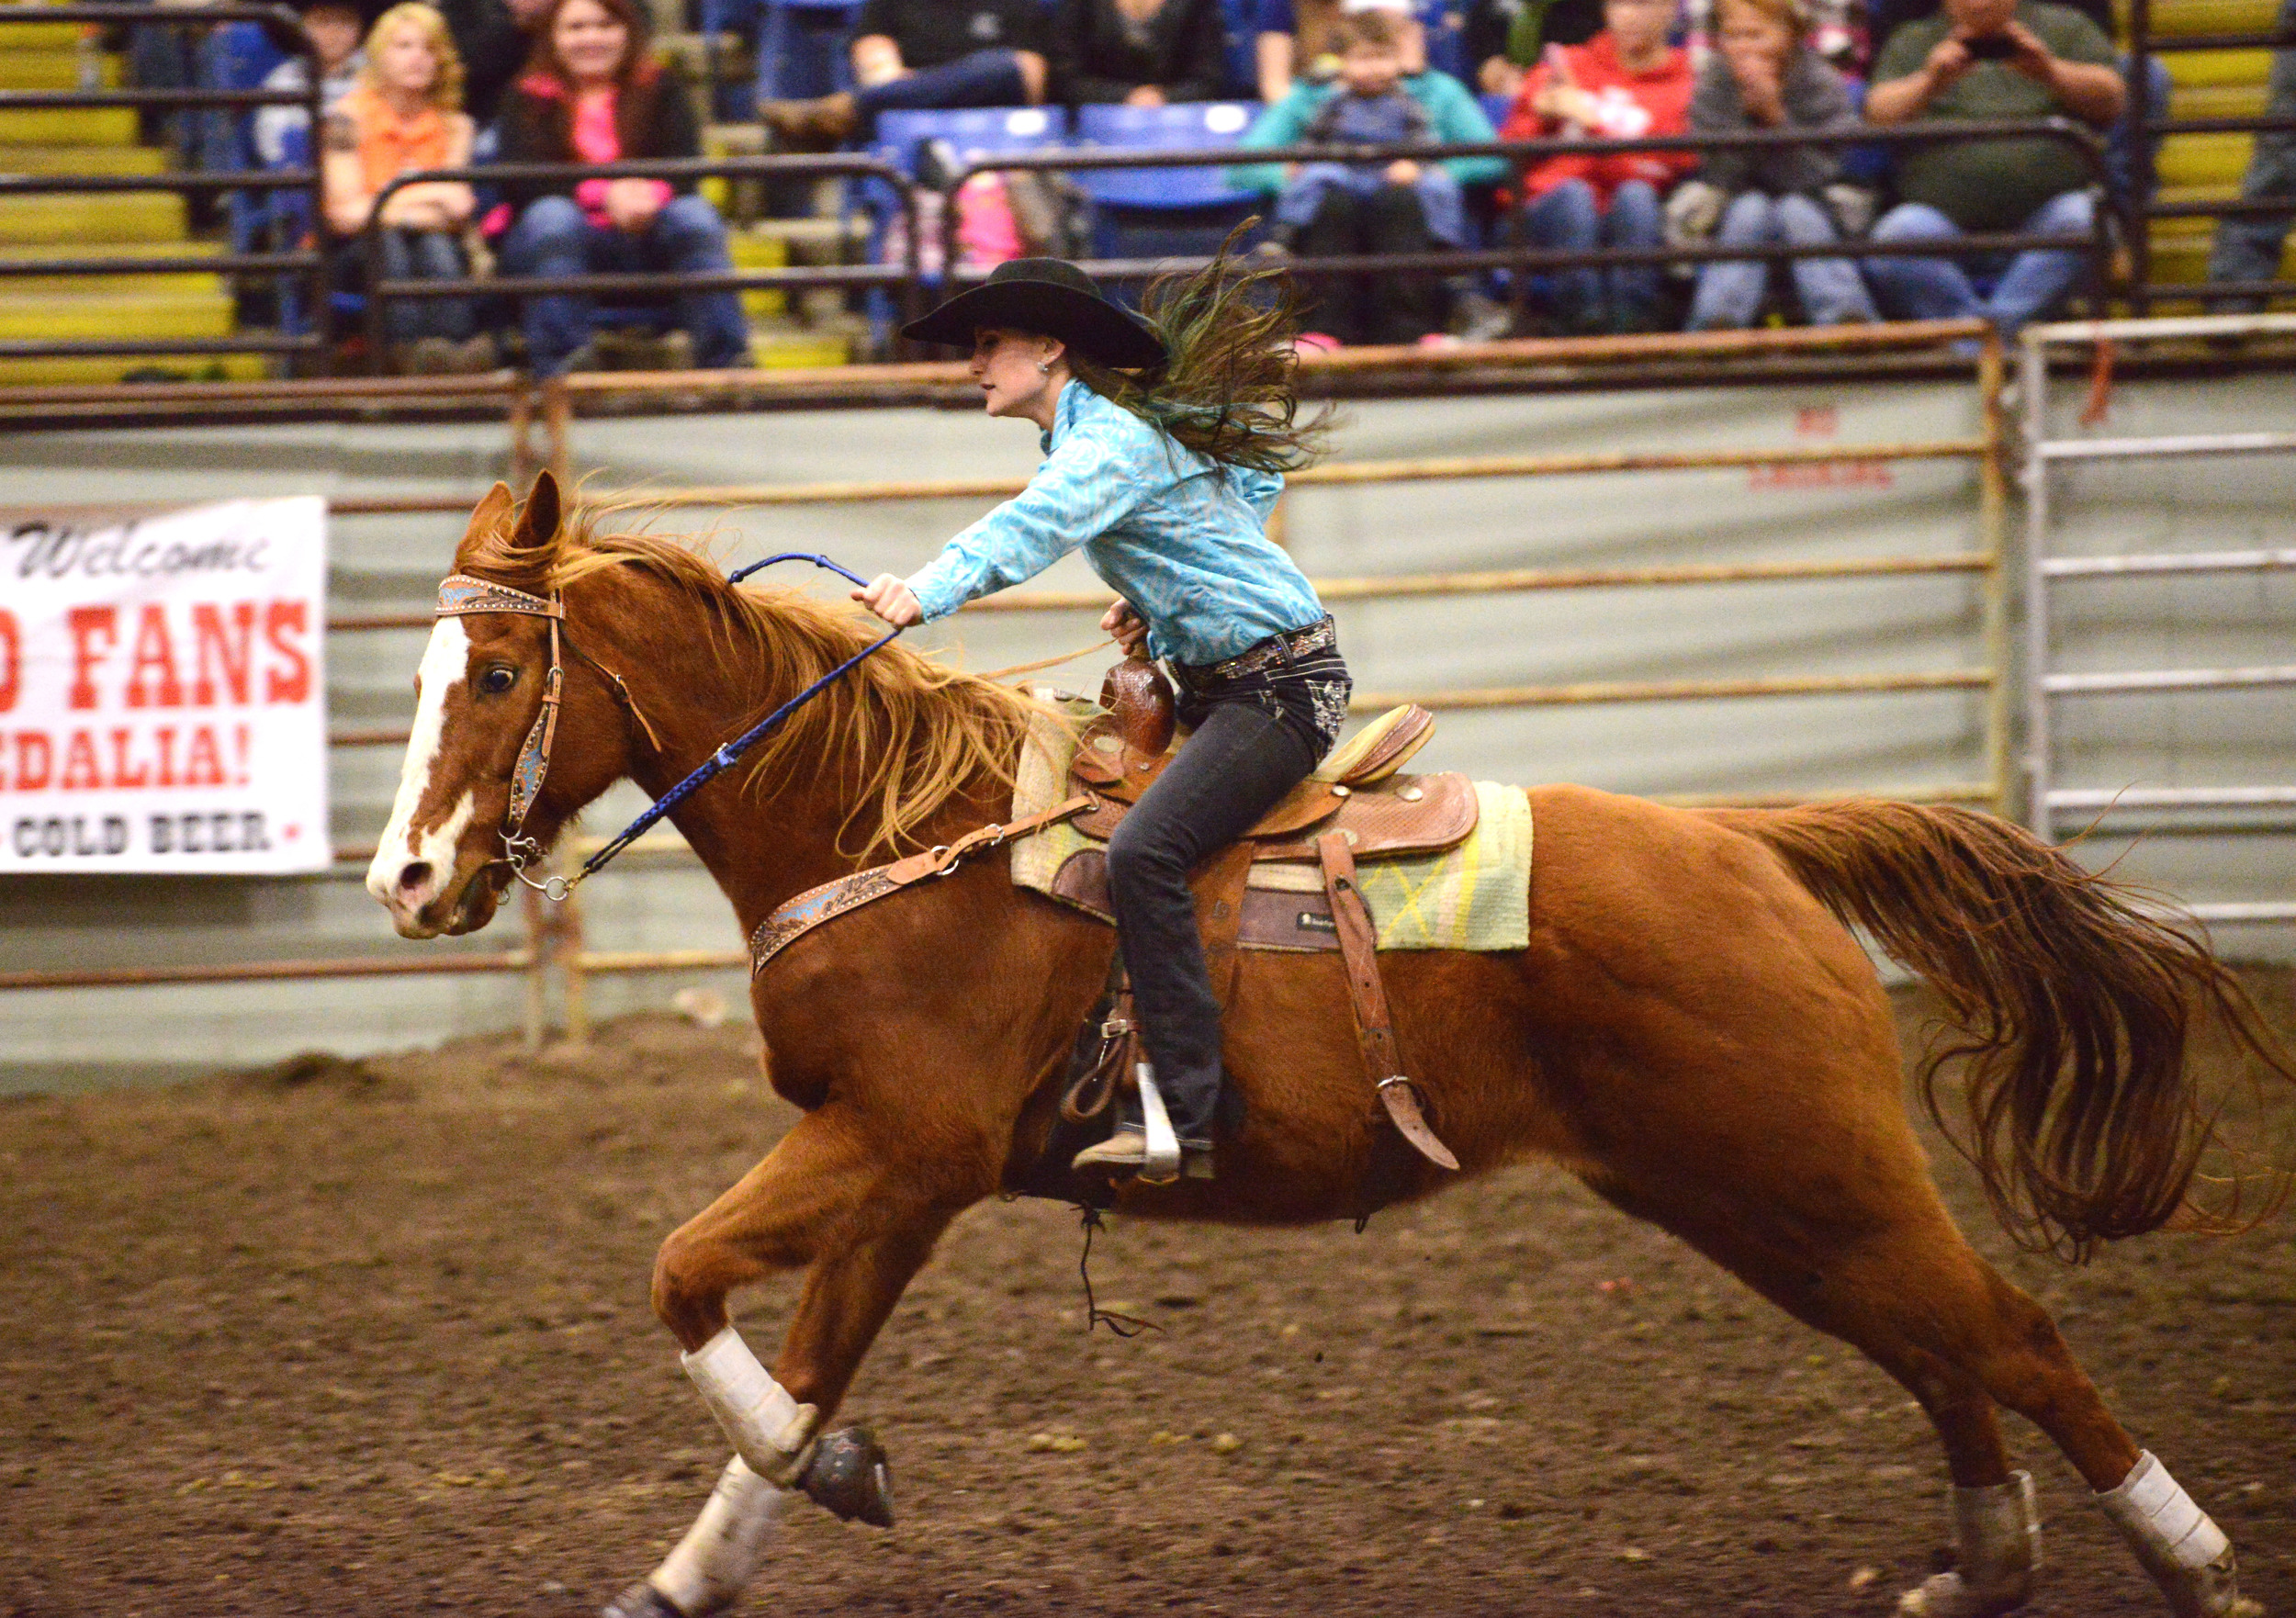   Amee races on her horse Banjo at a rodeo in Sedalia, Mo. When she isn't racing, she's at school or working at Boonslick Animal Hospital. Amee says her dad wants her to be a vet, but after working for one, she doesn't think that's what she wants to 